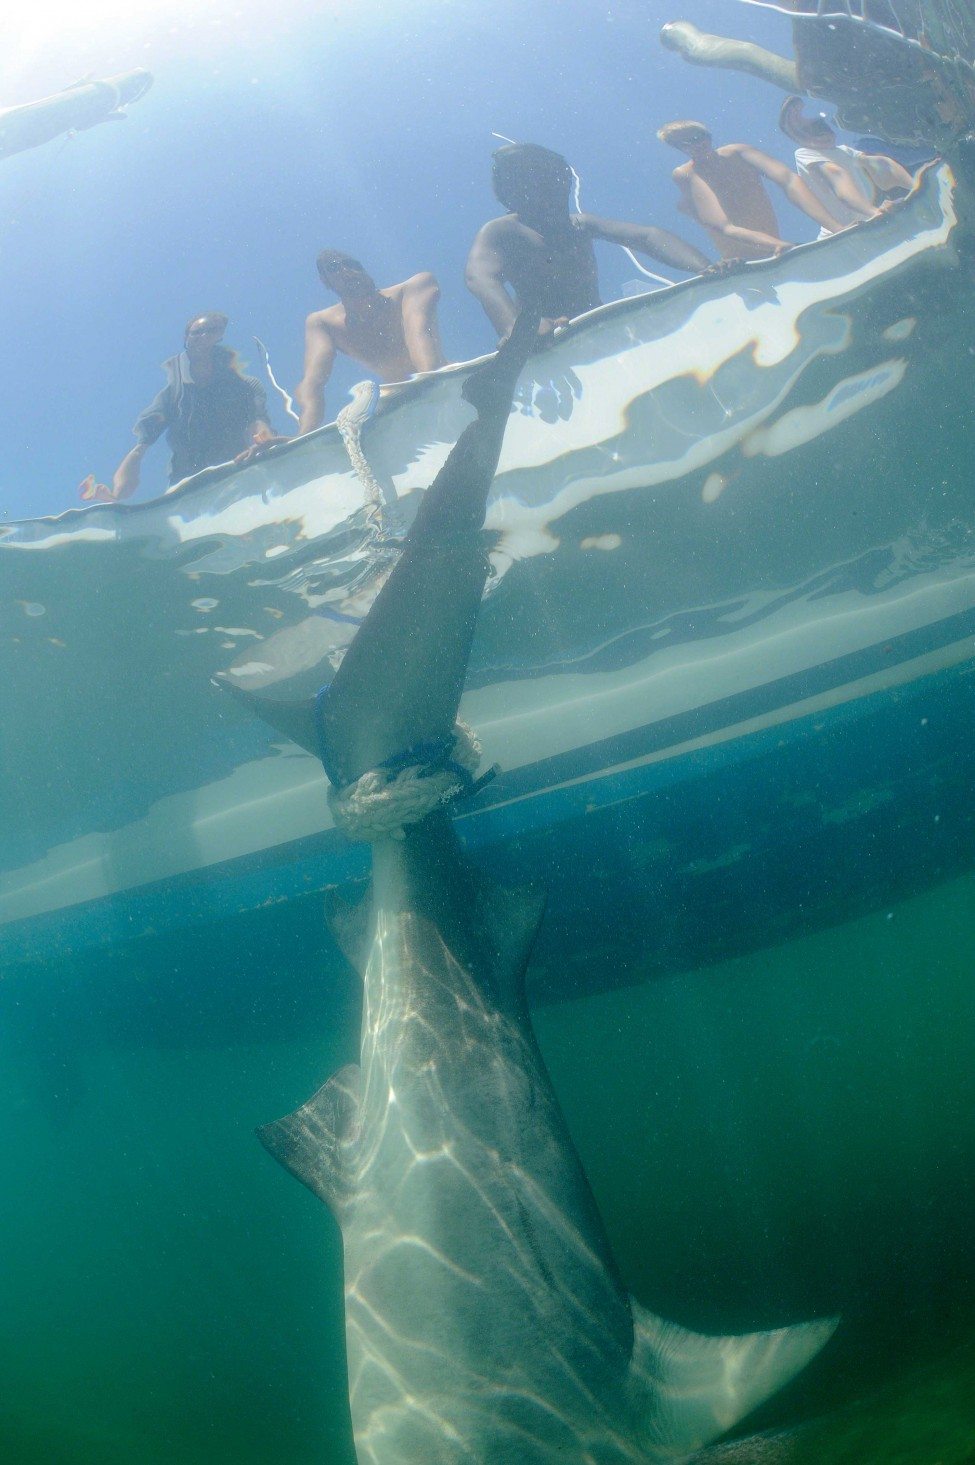 A dead shark dangles from the side of a boat.<br />
Photo by Thomas Peschak